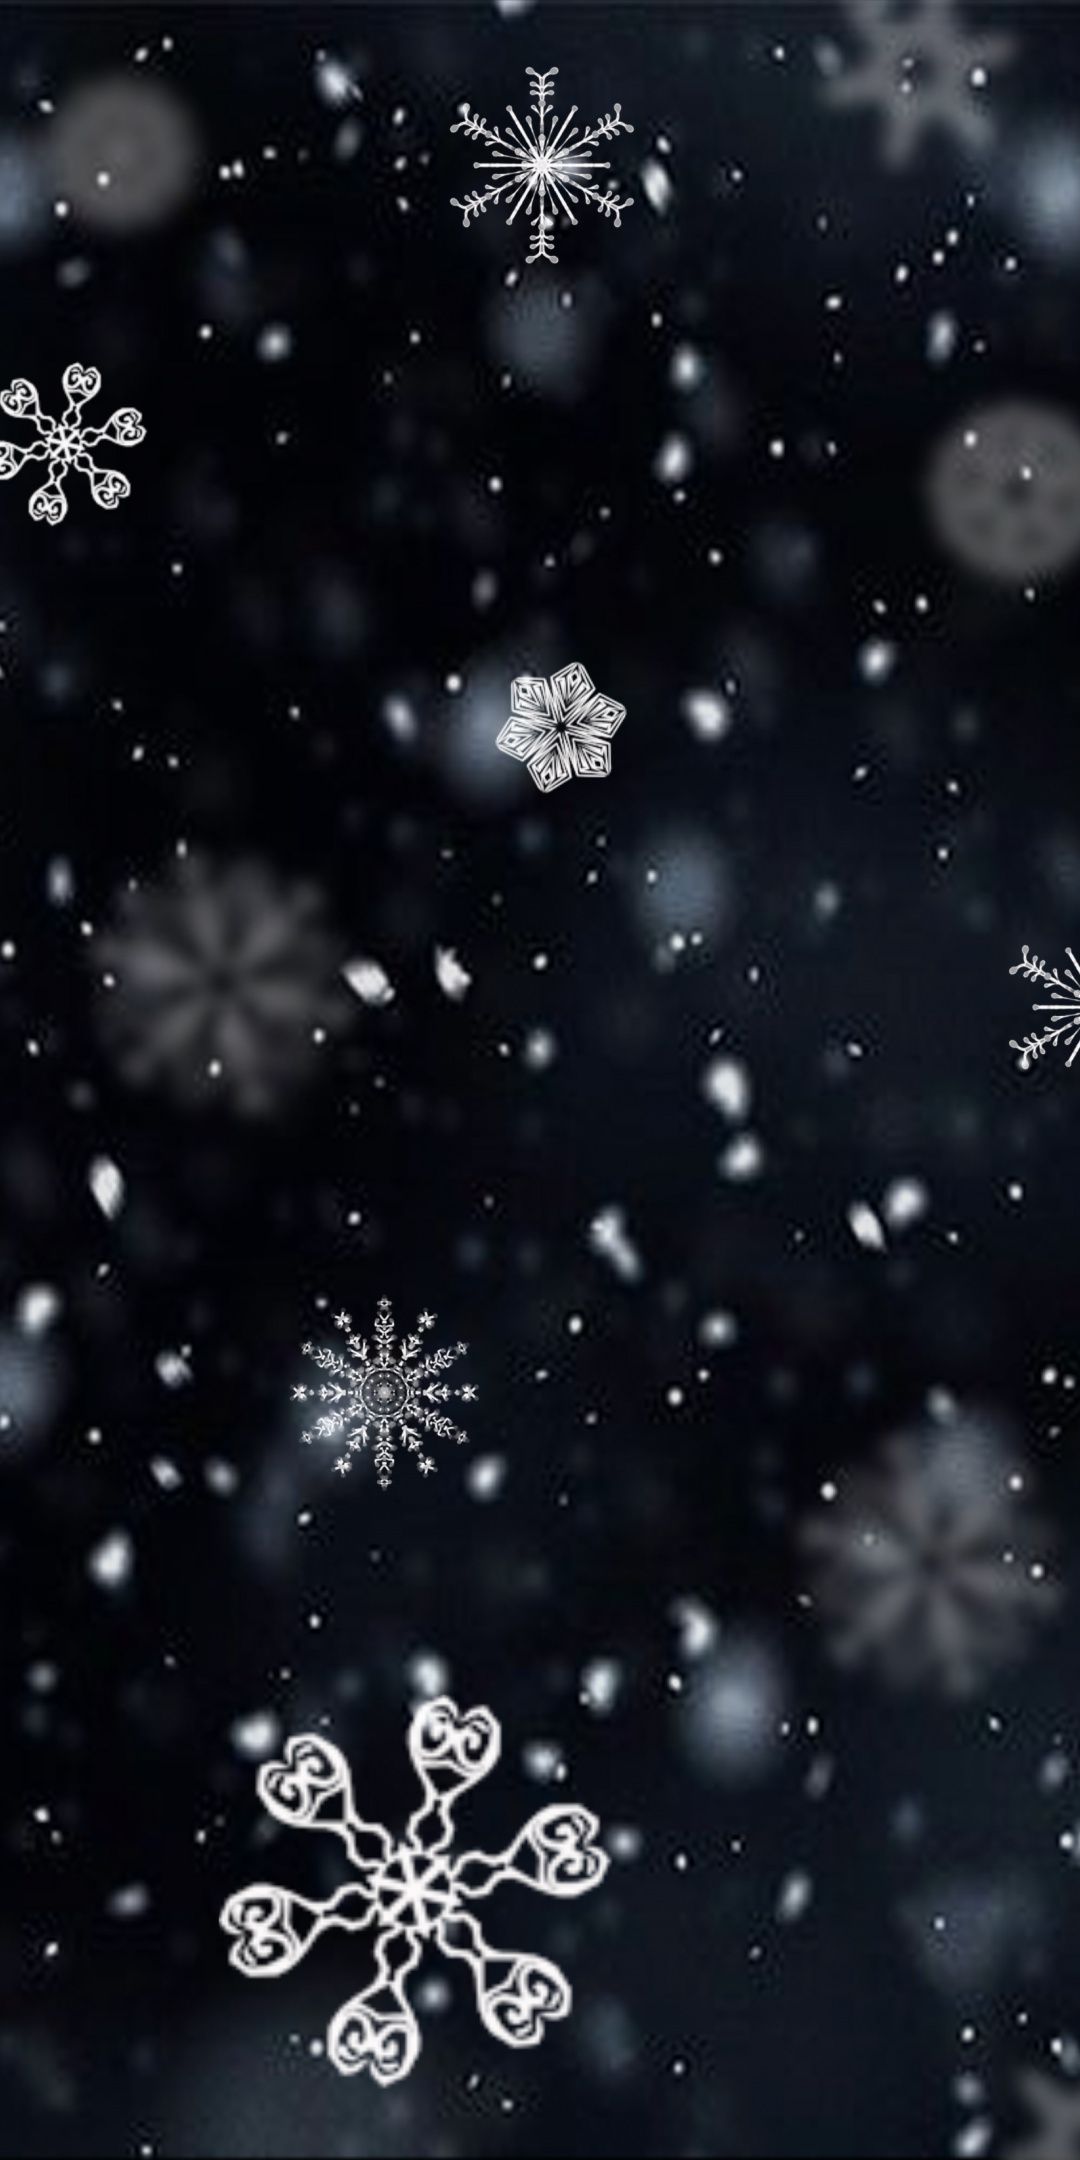 Abstract, snowflakes, pattern, texture, 1080x2160 wallpaper. Xmas wallpaper, Snowflake wallpaper, Christmas phone wallpaper